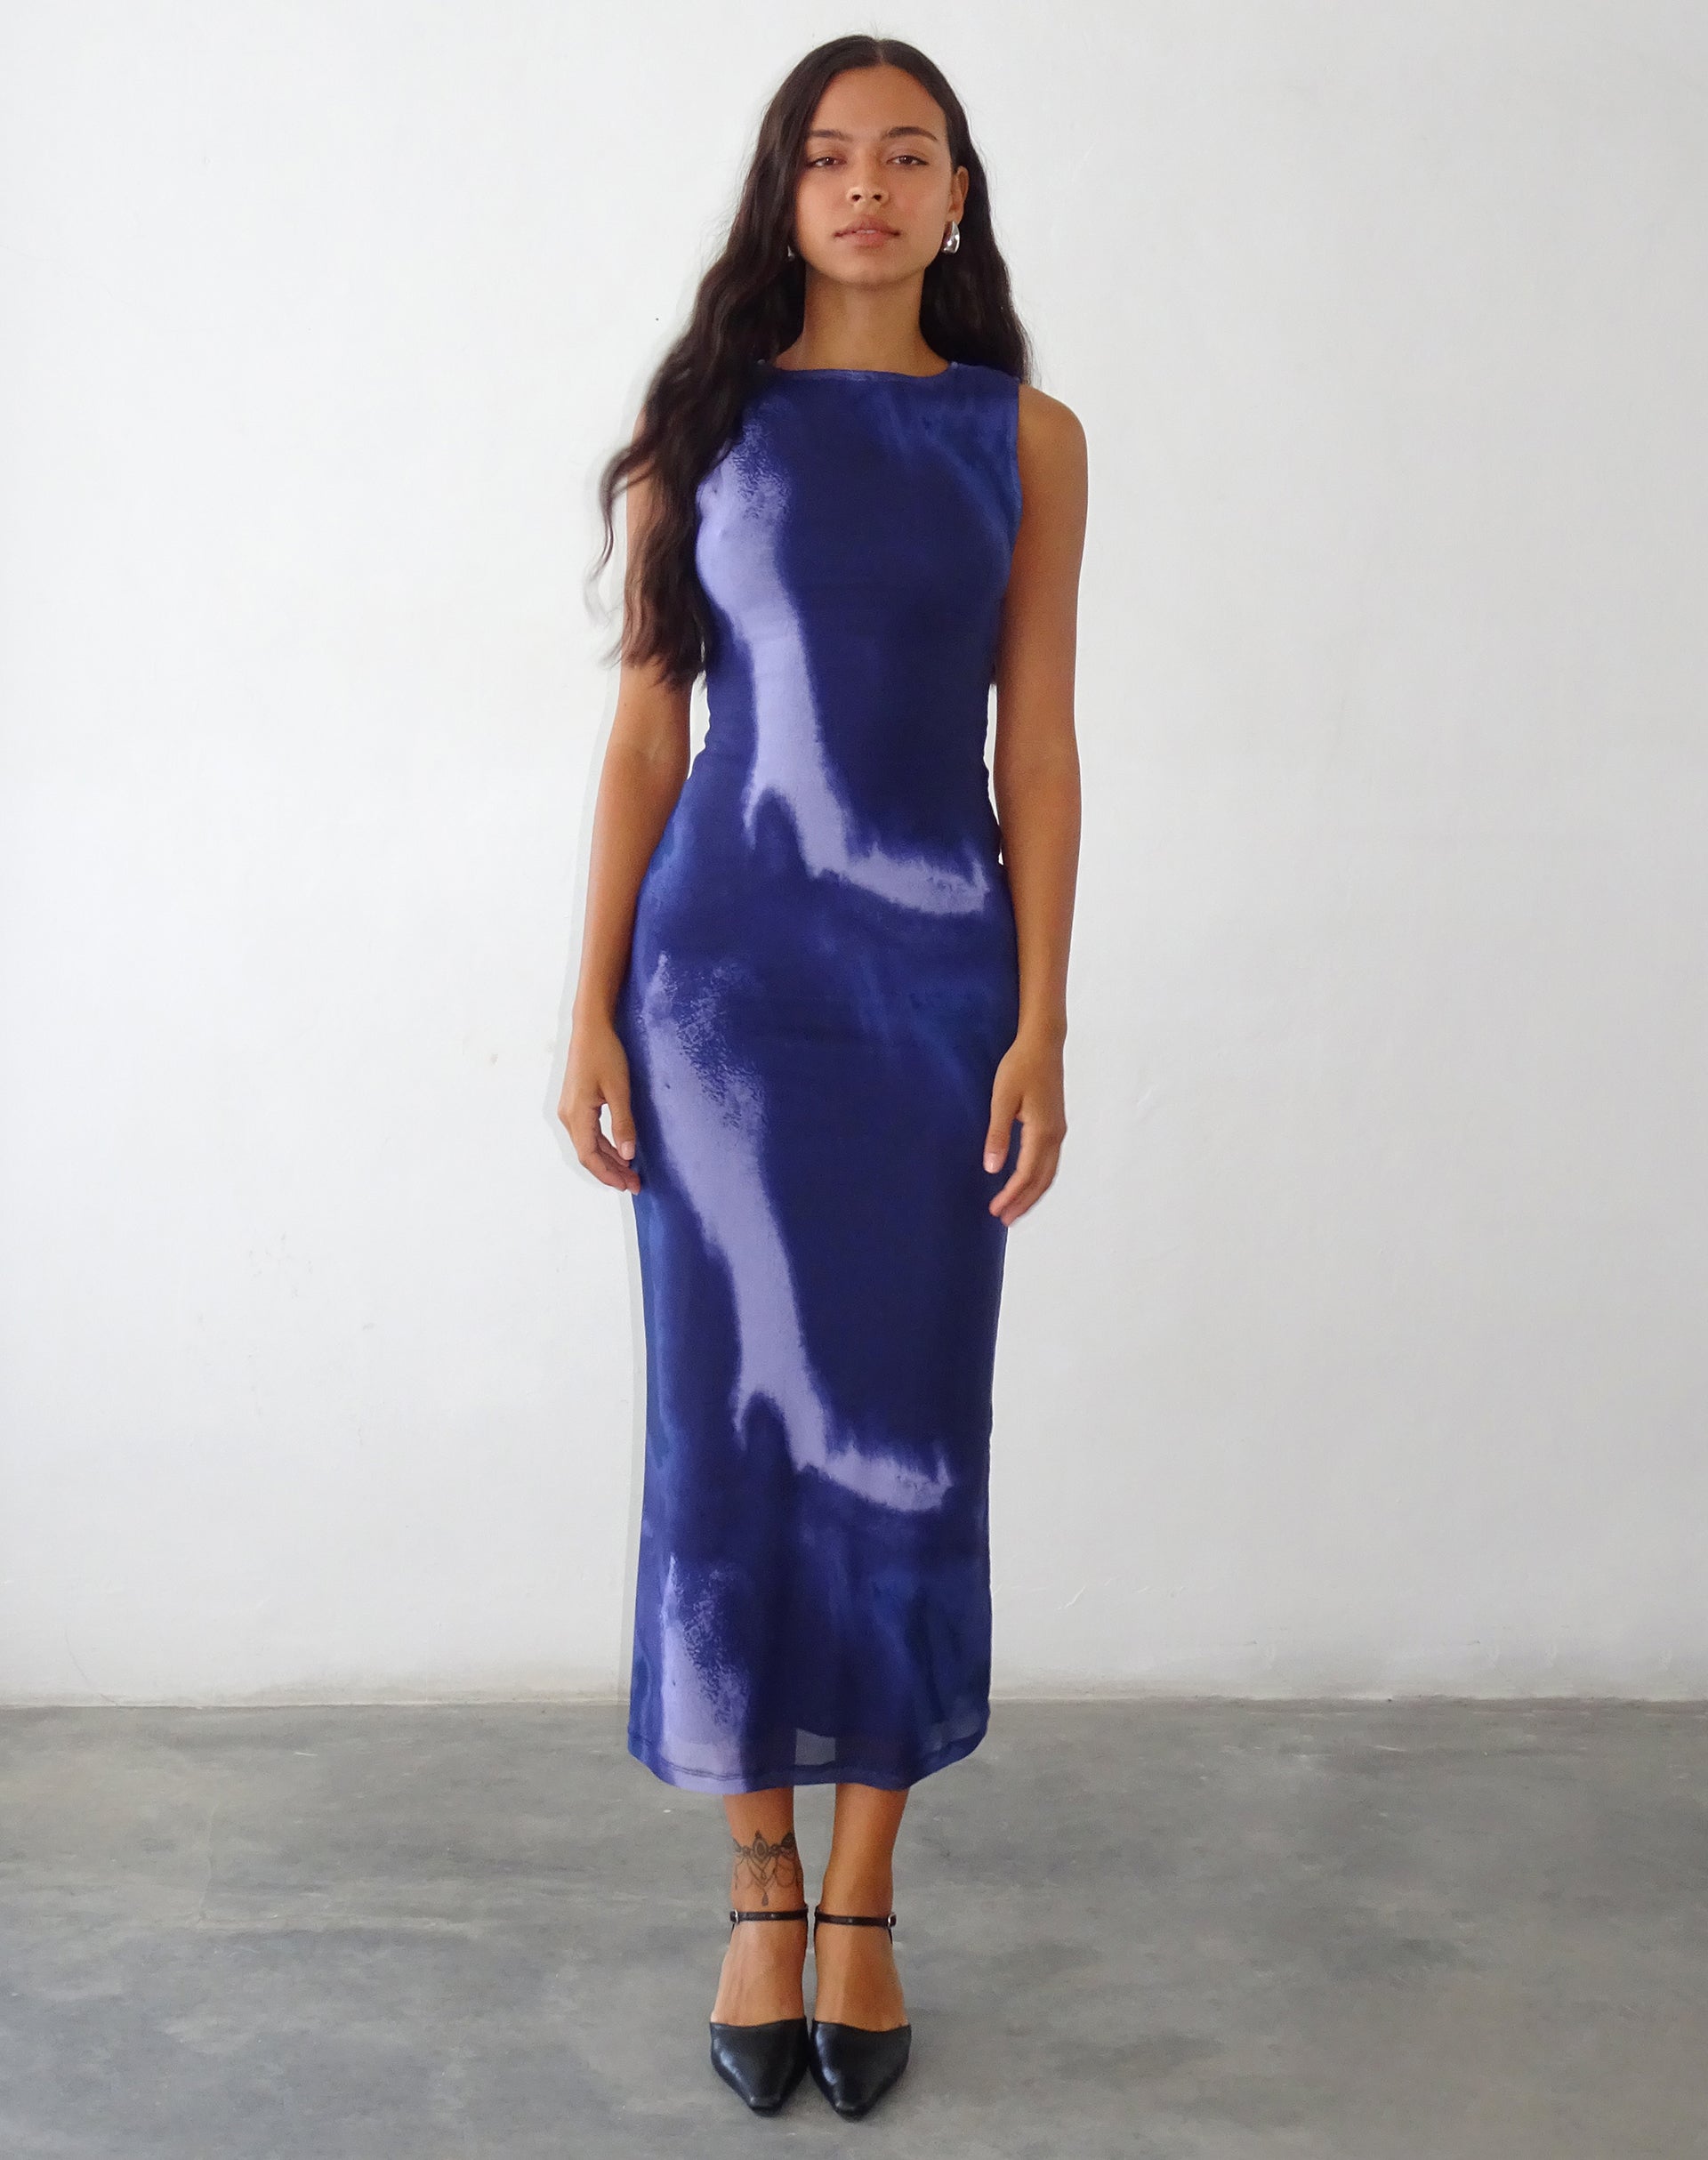 Image of Fayola Printed Maxi Dress in Watercolour Navy